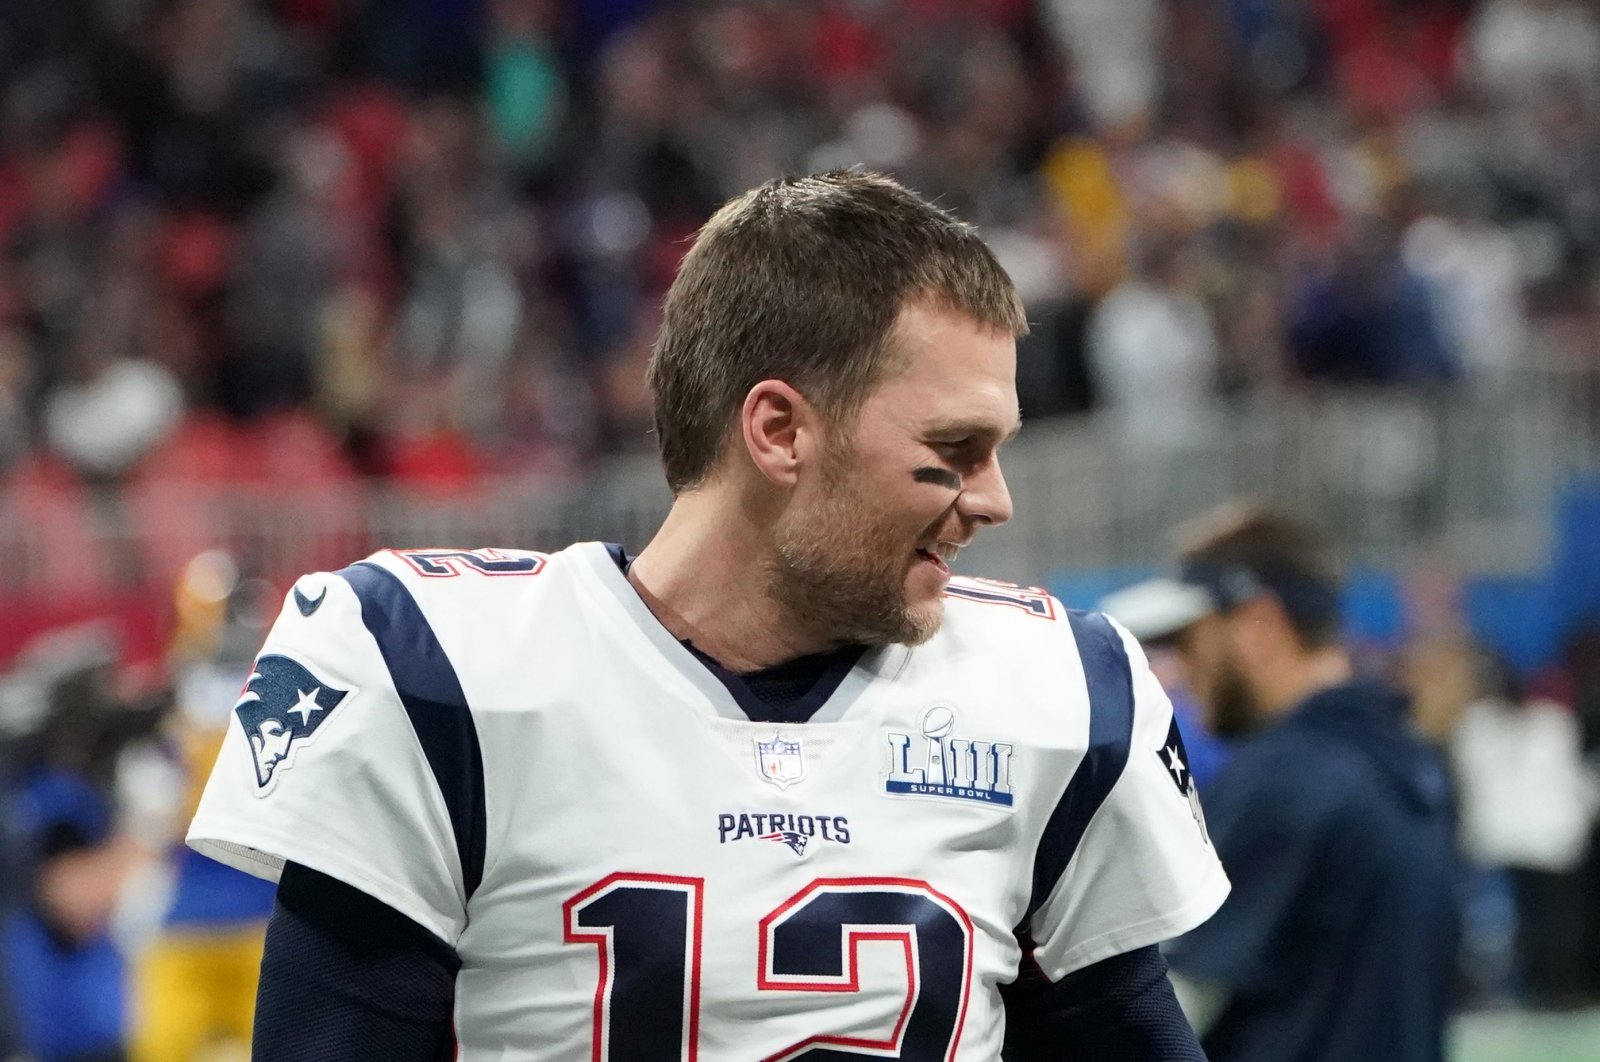 Tom Brady reacts before the Super Bowl LIII between the New England Patriots and the Los Angeles Rams at Mercedes-Benz Stadium in Atlanta, Georgia, Feb. 3, 2019. (AFP Photo)